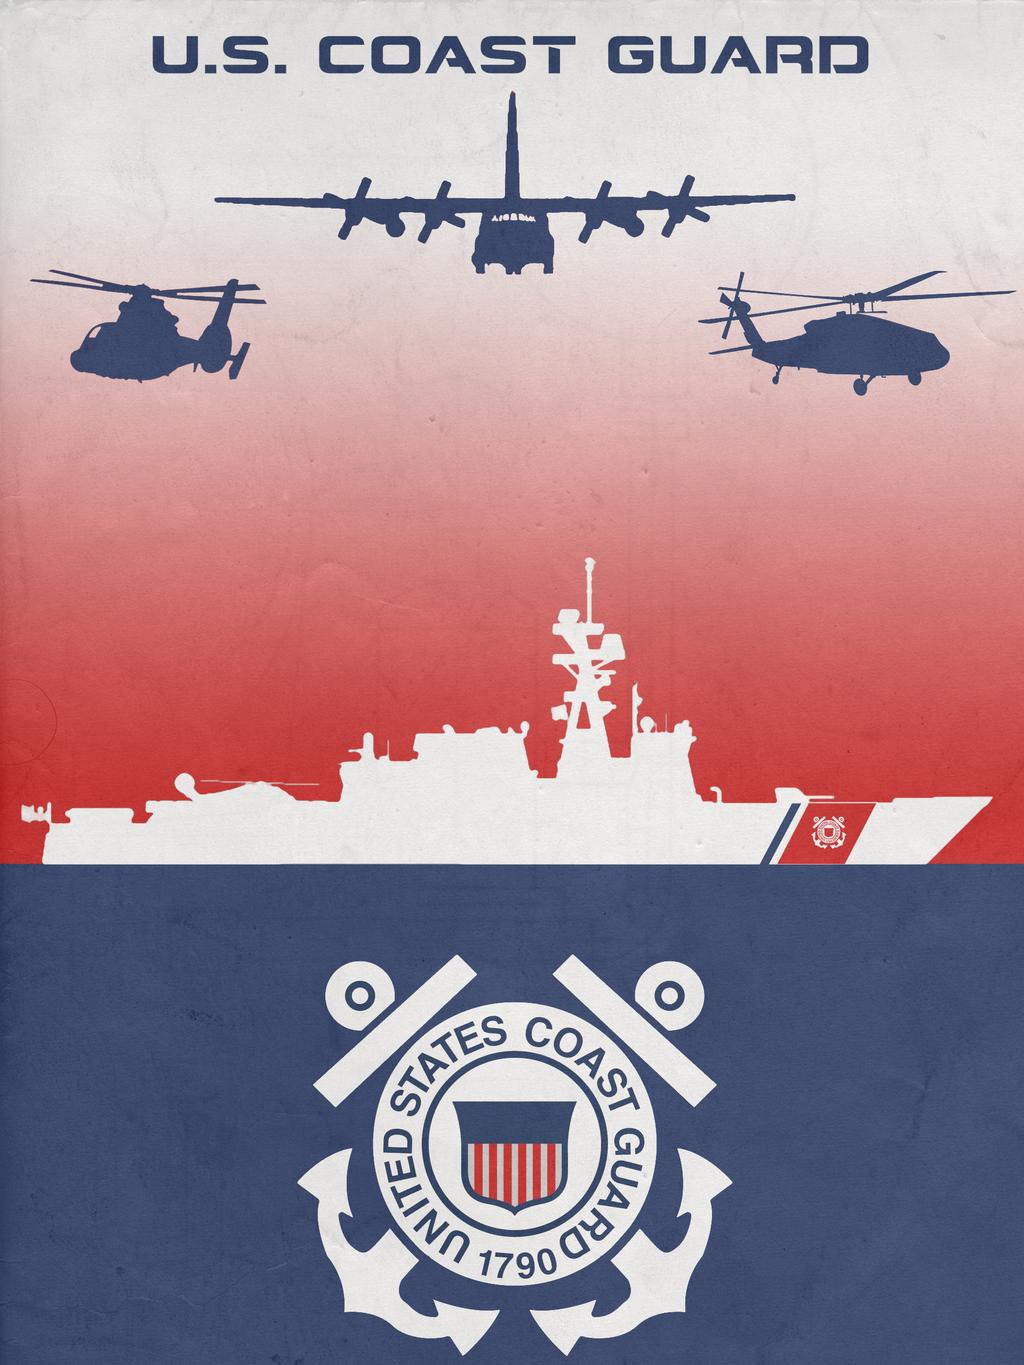 US Coast Guard (Version 2) by Noble-6